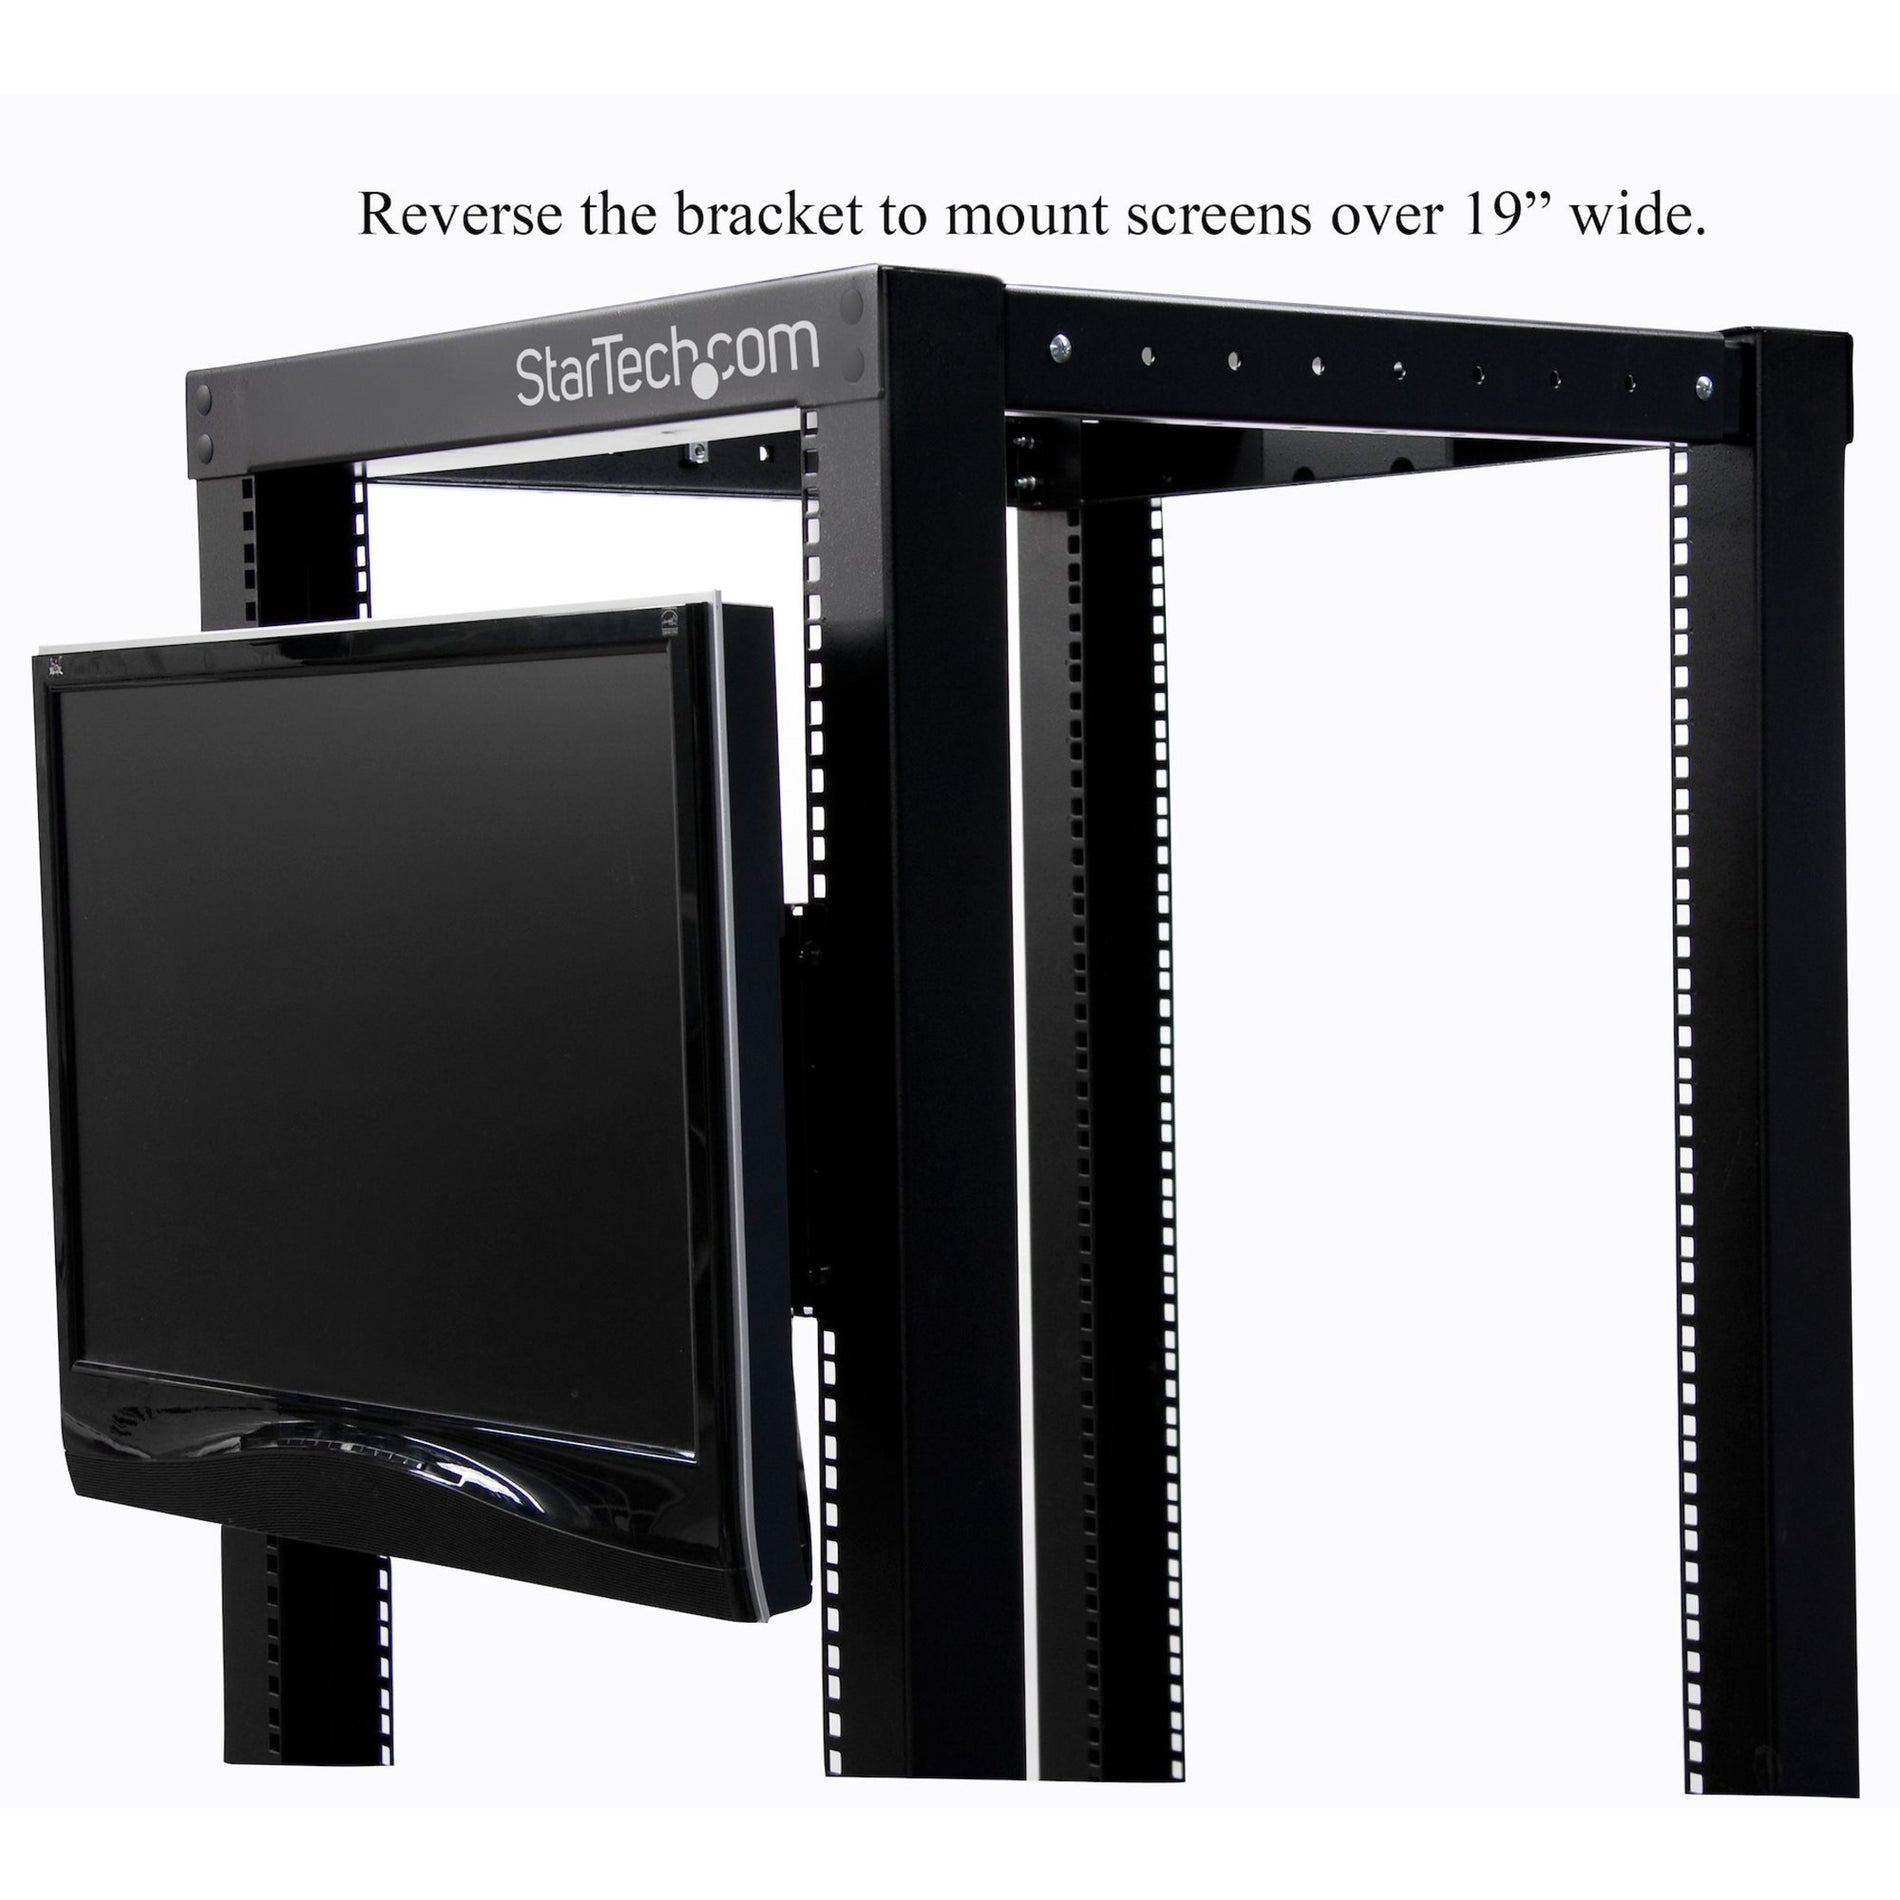 StarTech.com RKLCDBK Universal VESA LCD Monitor Mounting Bracket for 19in Rack or Cabinet, Durable and Versatile Solution